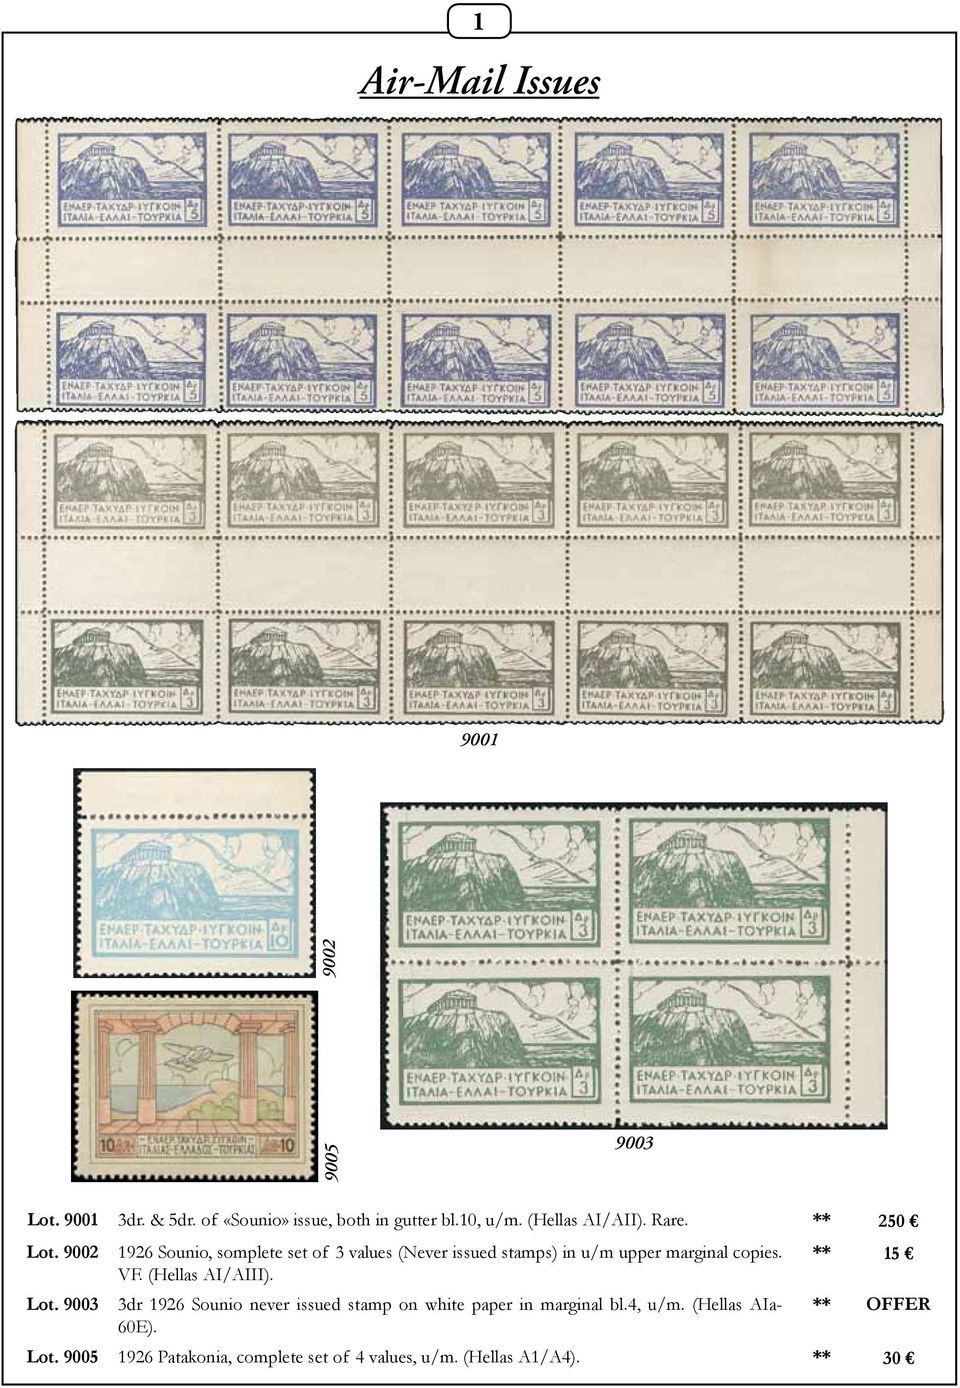 9002 1926 Sounio, somplete set of 3 values (Never issued stamps) in u/m upper marginal copies. ** 15 VF.